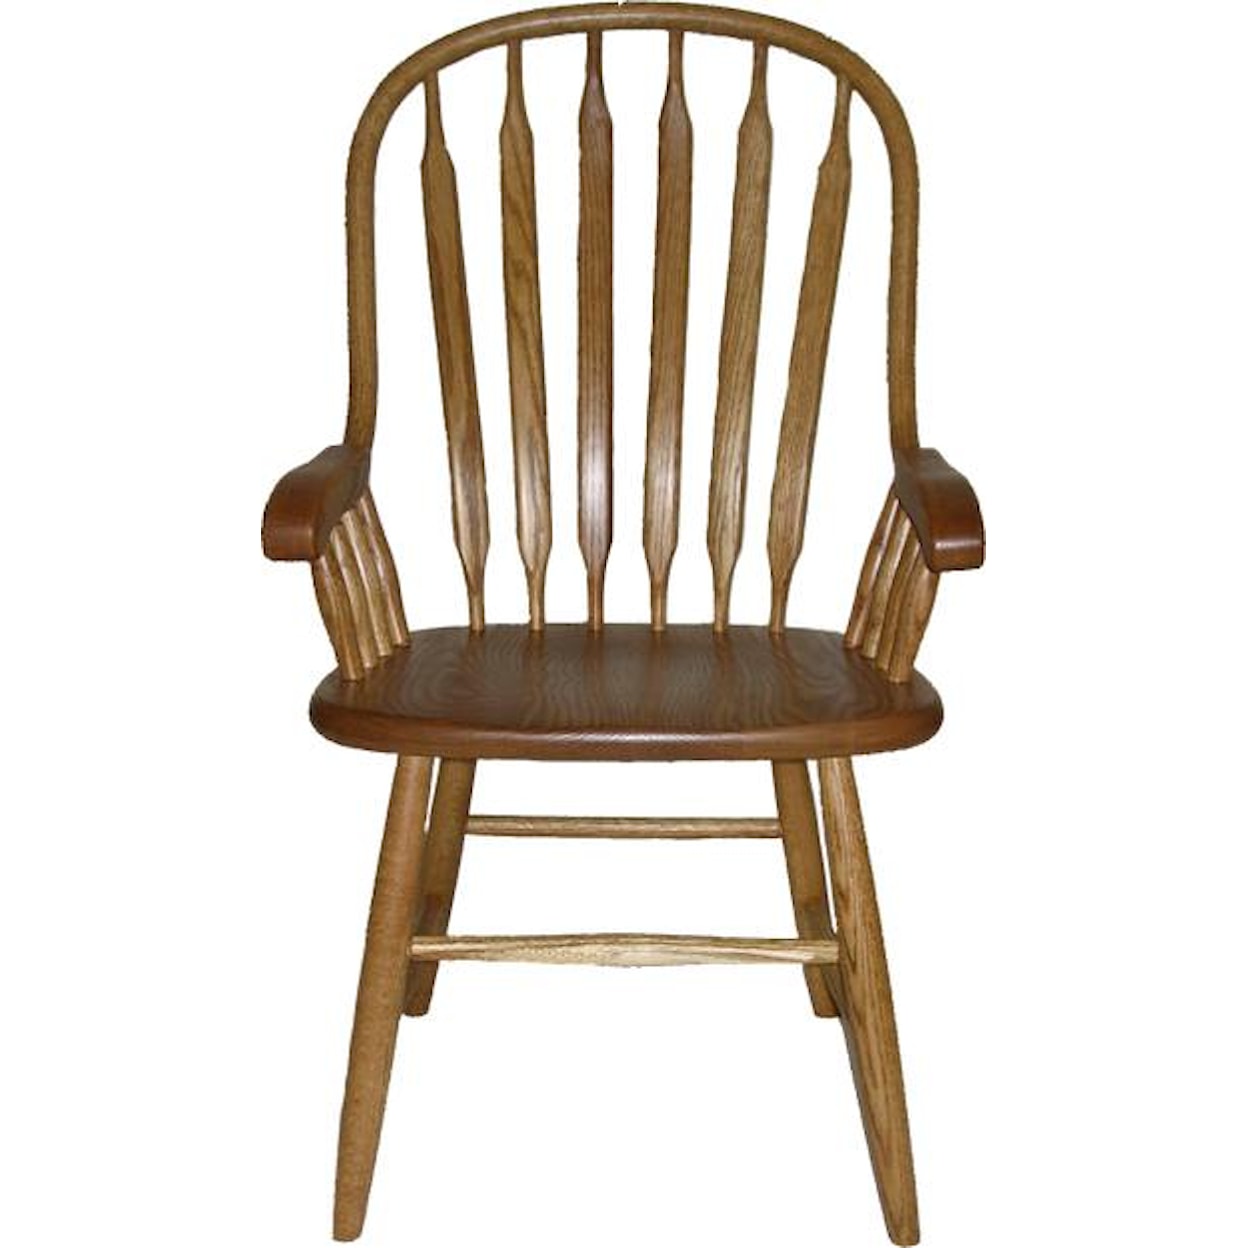 L.J. Gascho Furniture Heritage  Arm Chair